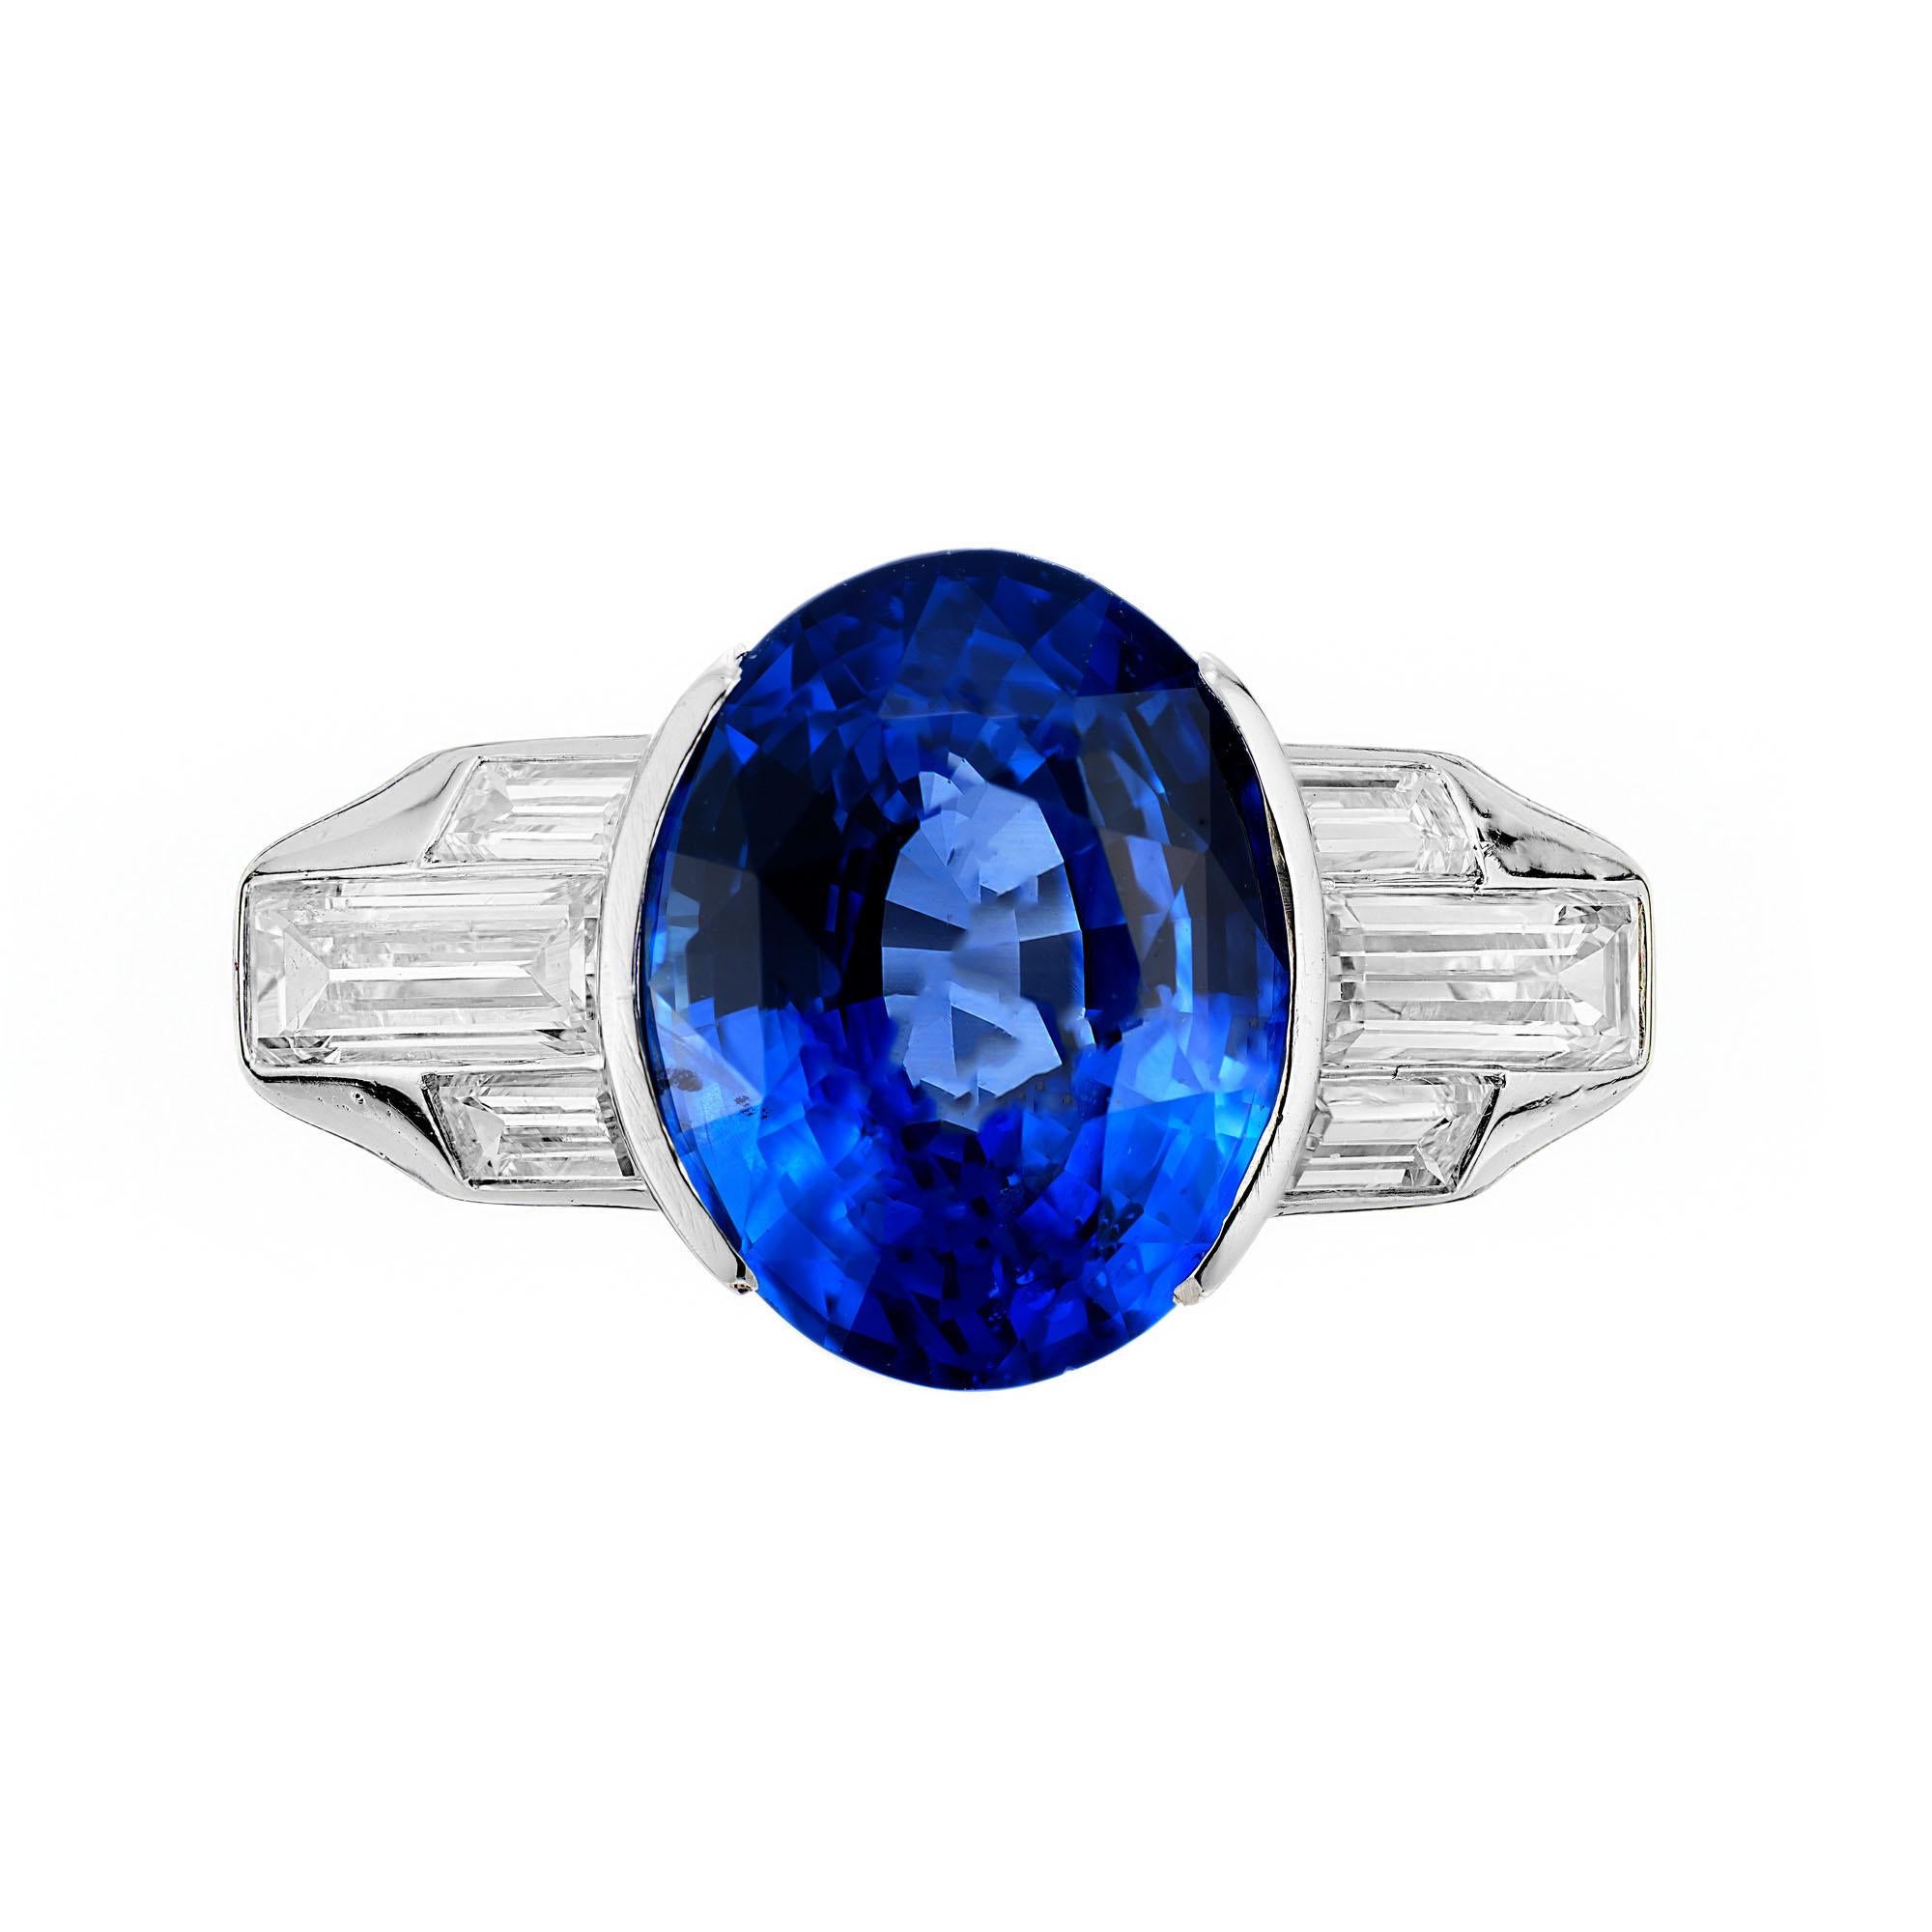 Semi bezel center Blue Sapphire natural corundum, simple heat only no other enhancements.  a surface area of 12.45 x 9.72mm,

1 oval bright cornflower blue Ceylon Sapphire, approx. total weight 6.02cts, Ceylon origin, natural color, simple heat